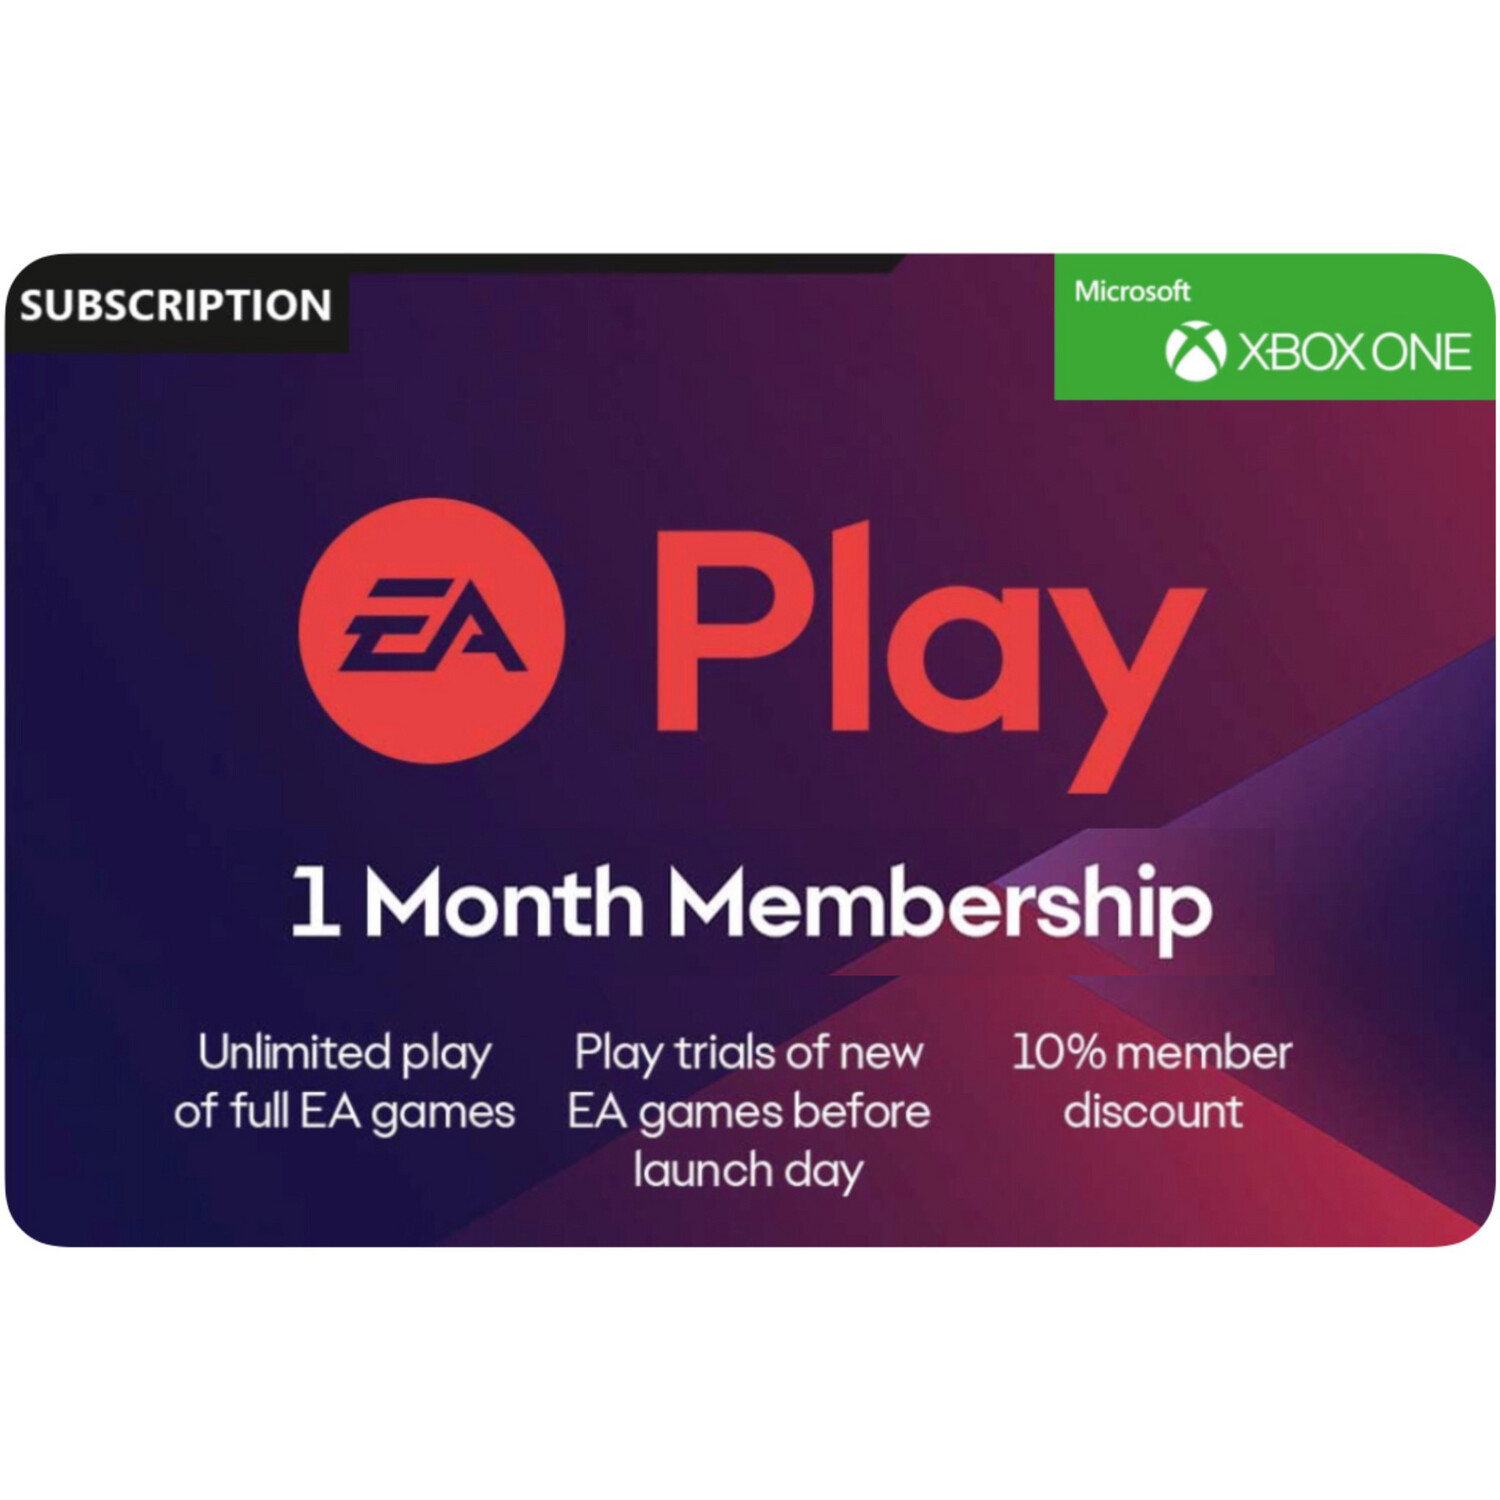 EA Play 1 Month Membership US for Xbox